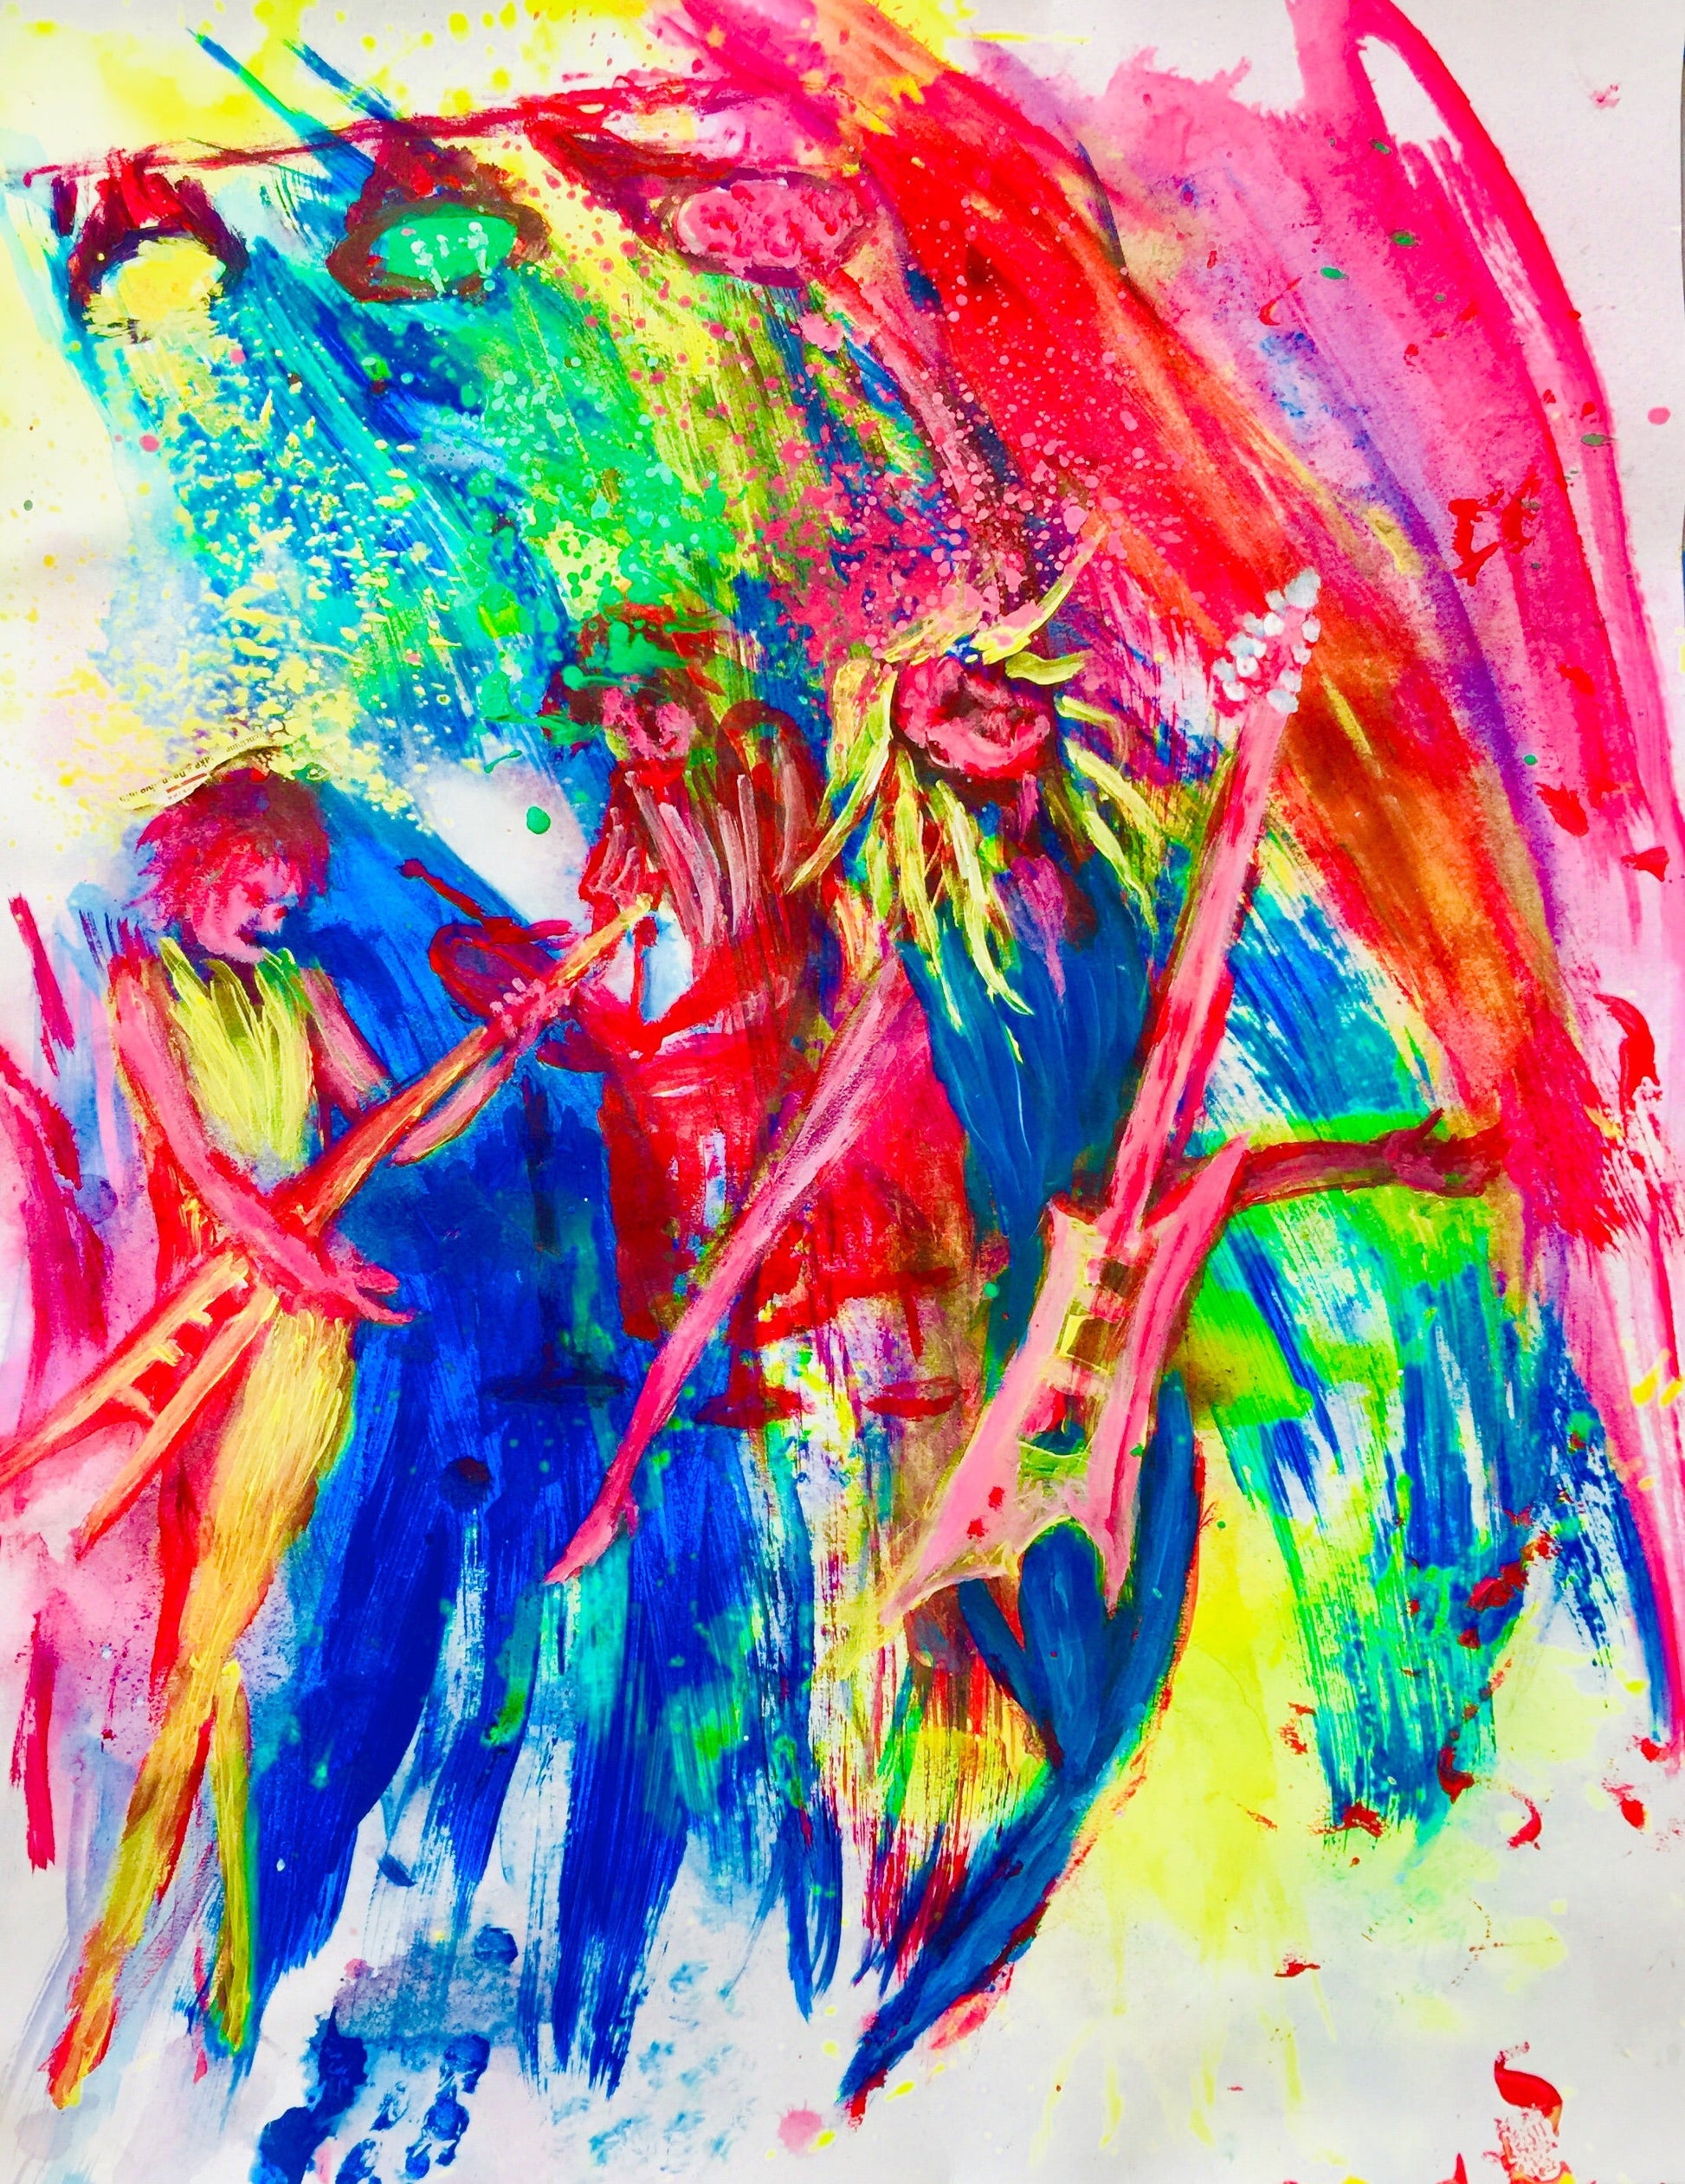 “ROOSTER” Rock On - Sonarta.com To all you musicians, keep Rockin’ “You make the world go around” This painting is an Acrylic on Canvas by Shahla Rahimi  Reynolds.  "Rooter" Rock On is 36”  H  x 24” W.. 